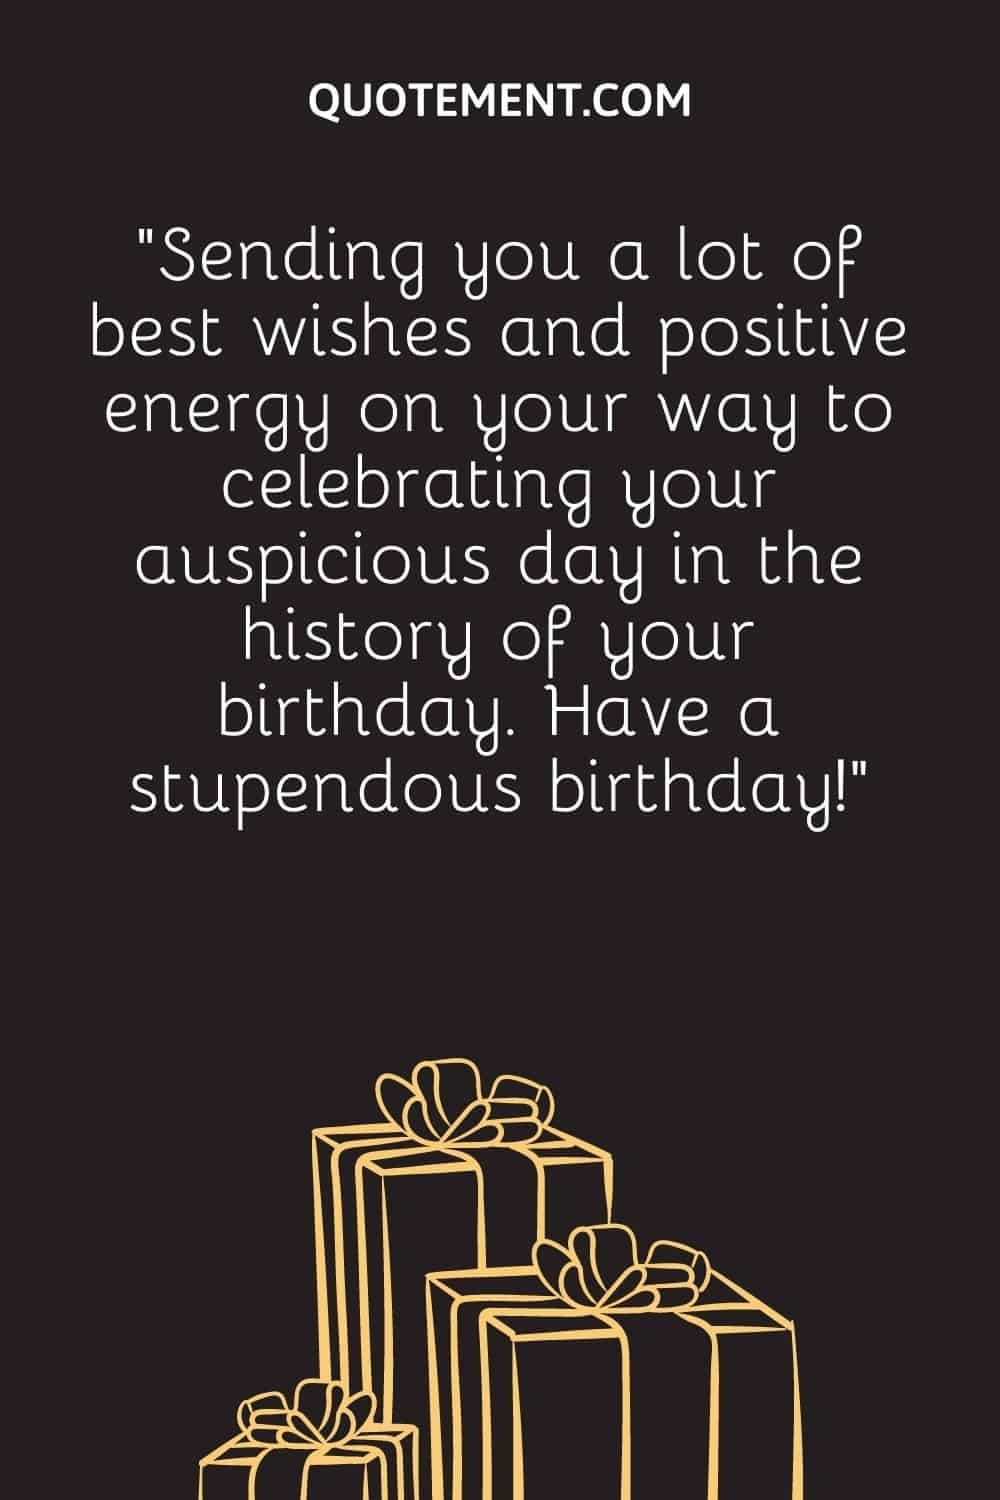 “Sending you a lot of best wishes and positive energy on your way to celebrating your auspicious day in the history of your birthday. Have a stupendous birthday!”